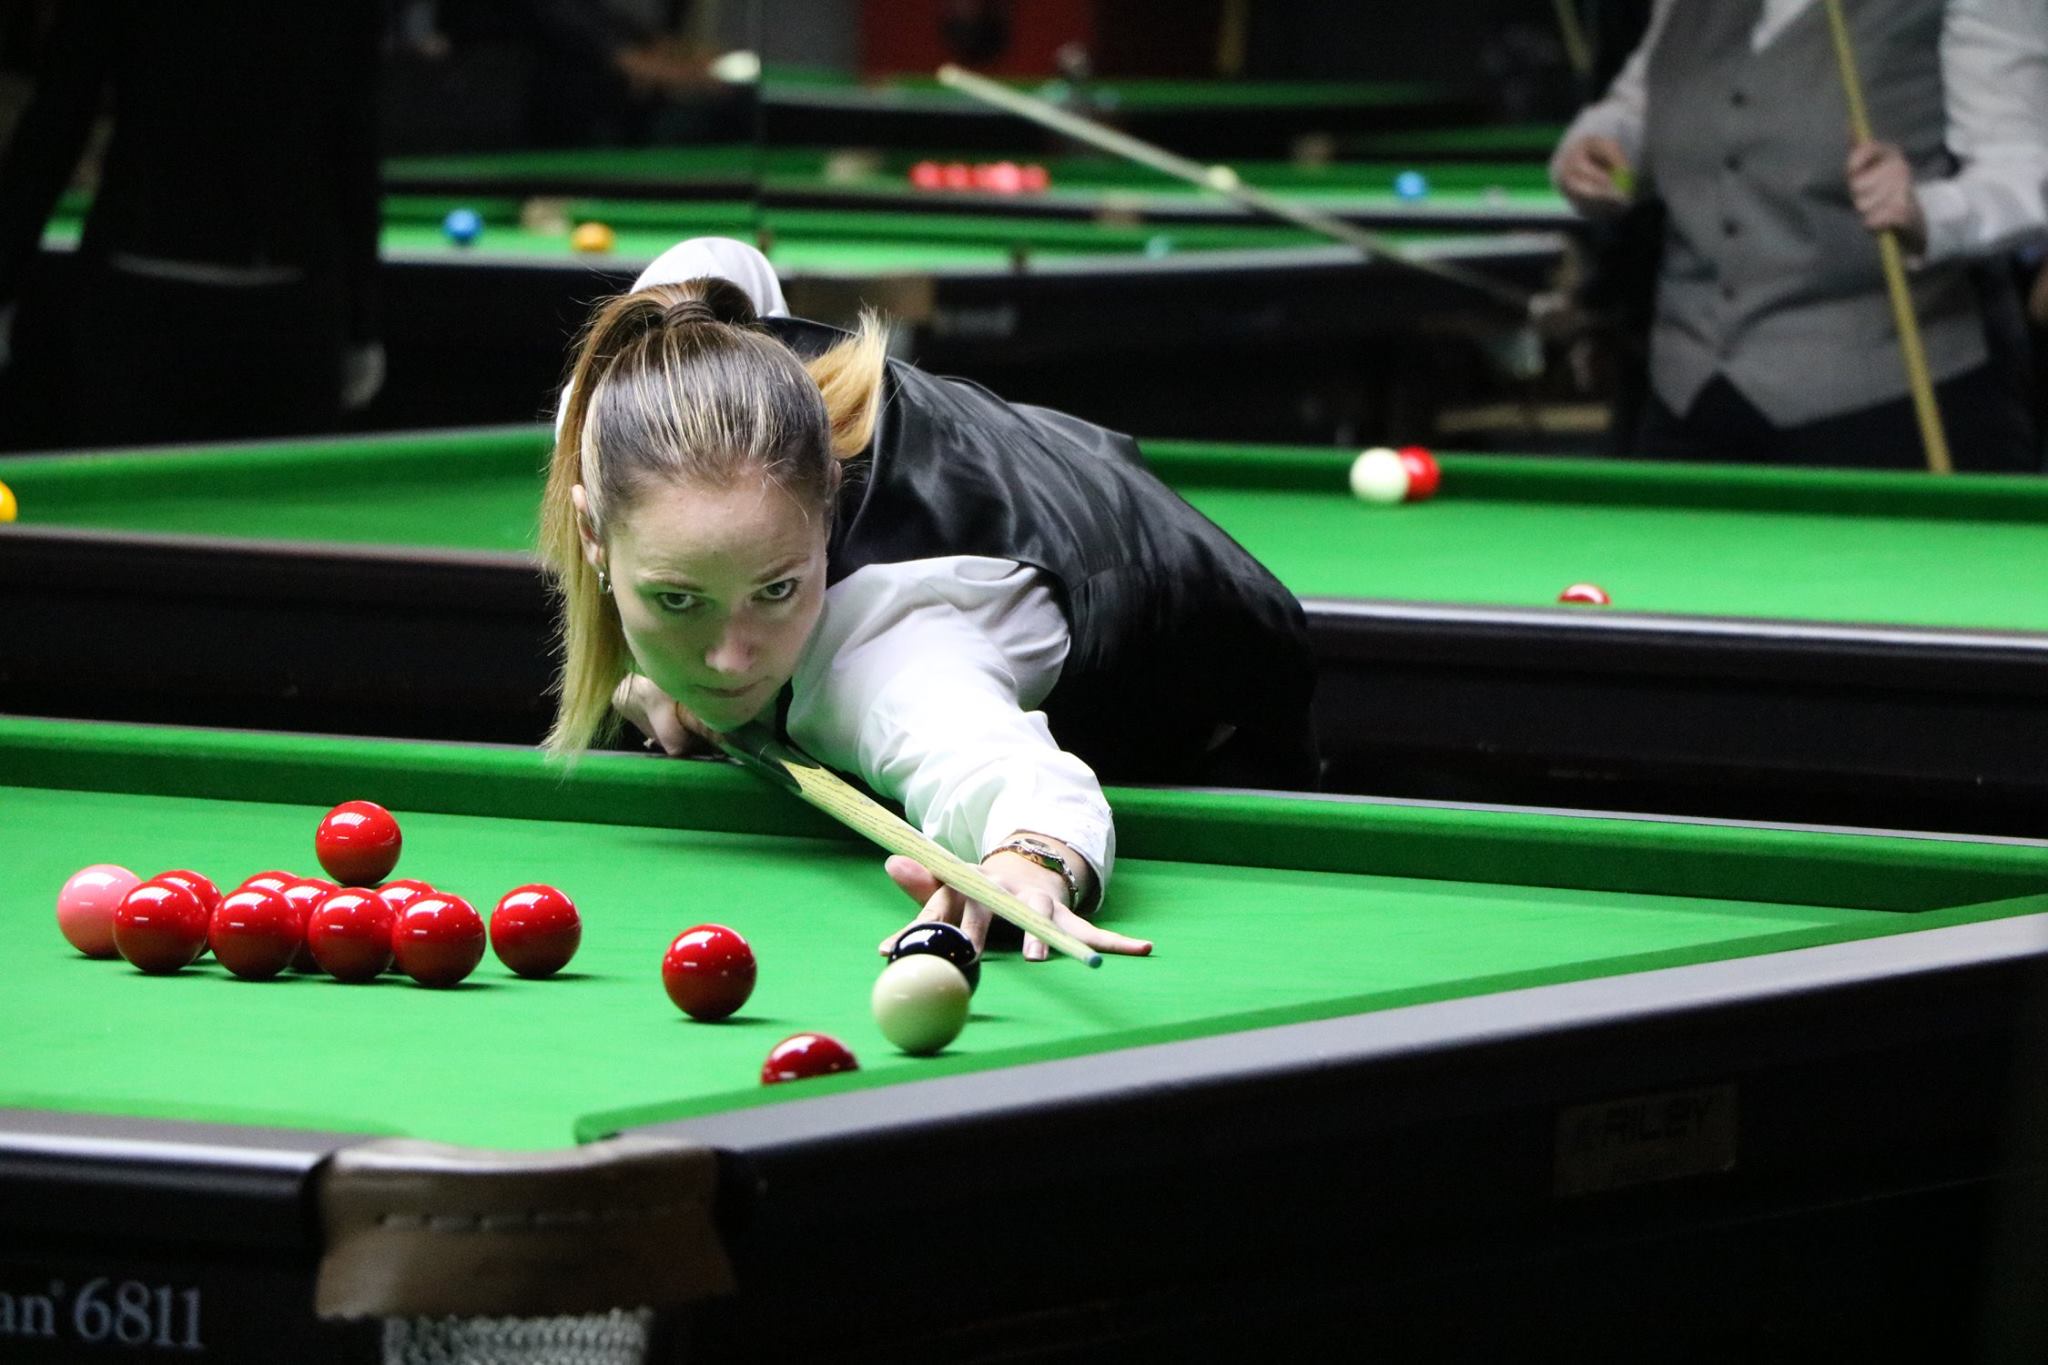 Evans and Kenna to Compete at Snooker Shoot Out